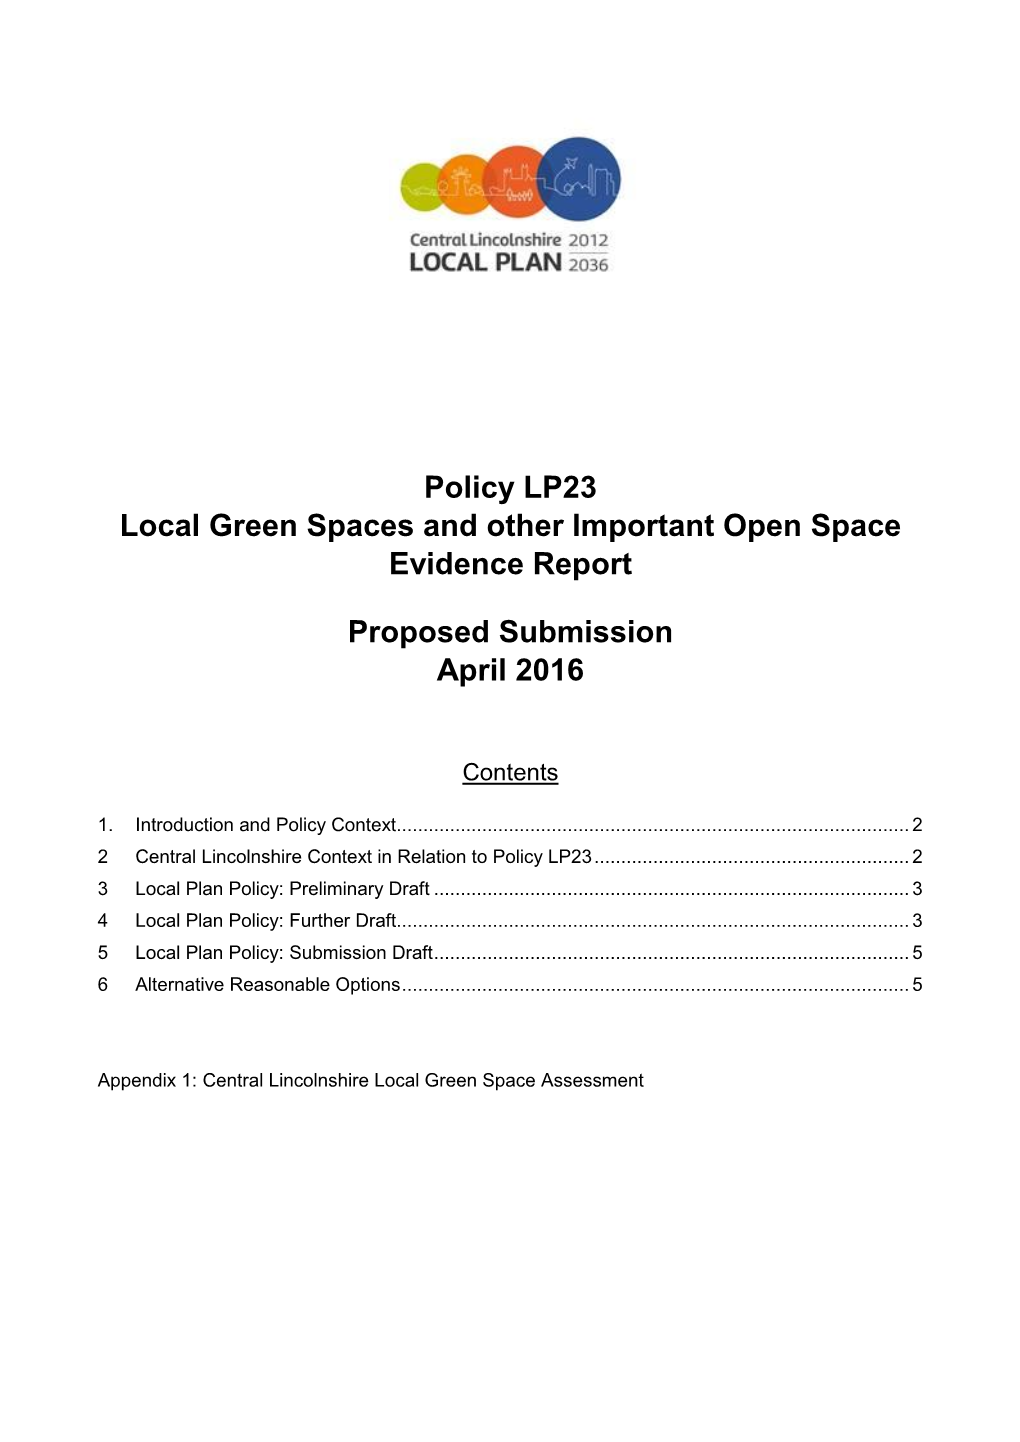 Policy LP23 Local Green Spaces and Other Important Open Space Evidence Report